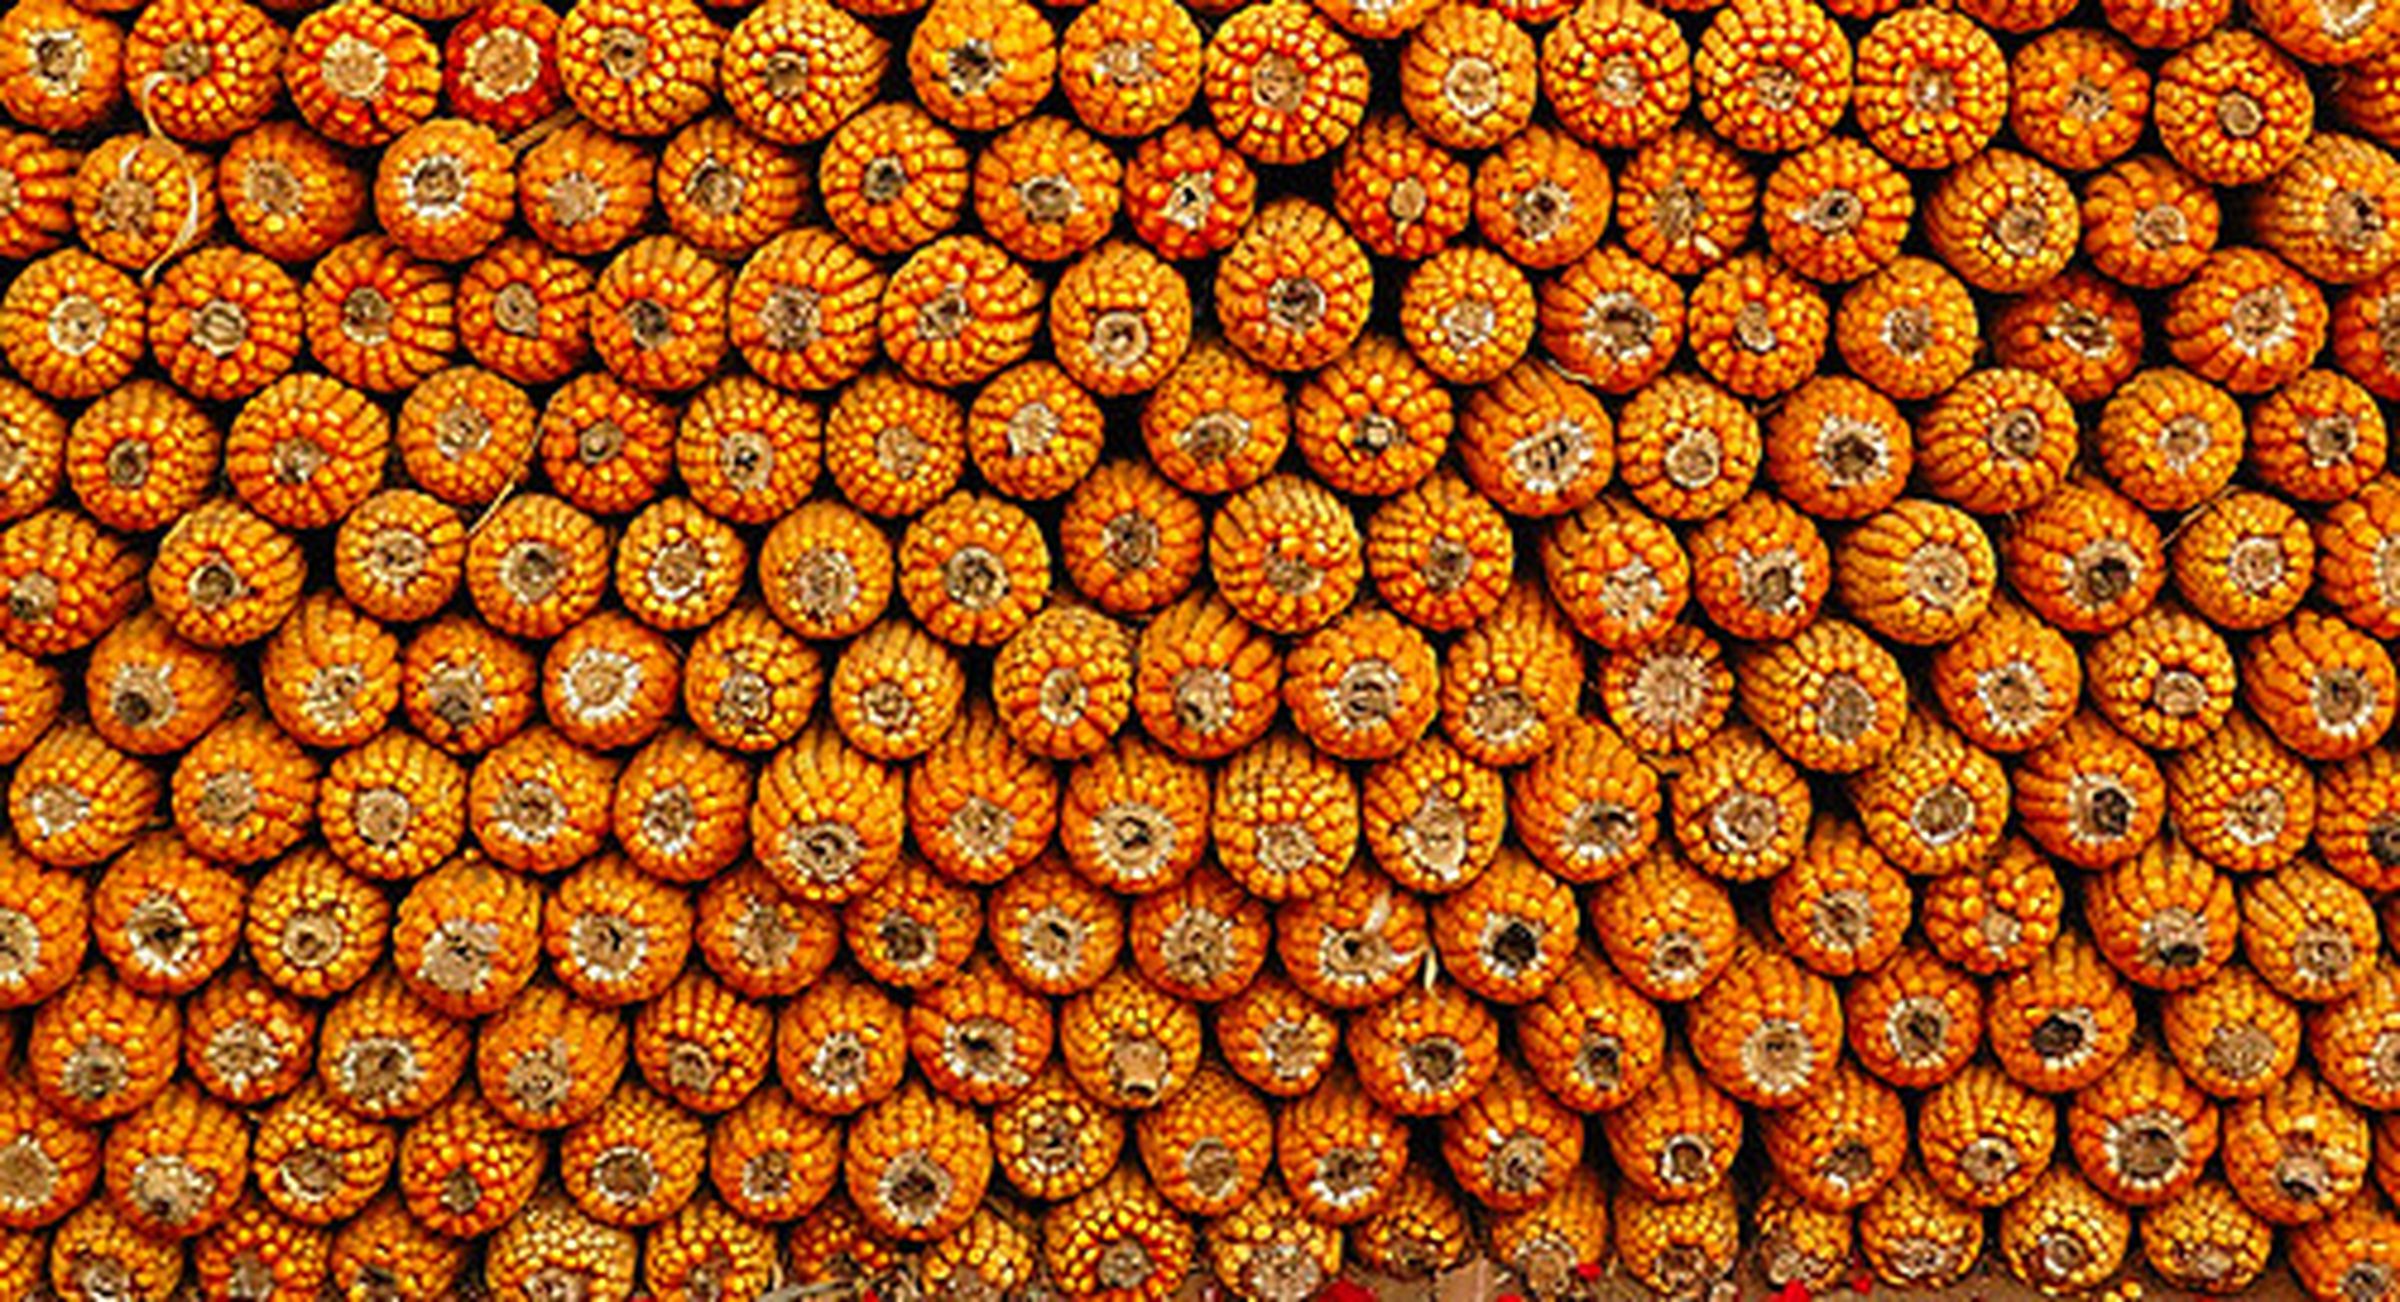 This picture of corn looks like “ladybugs” to an AI. 